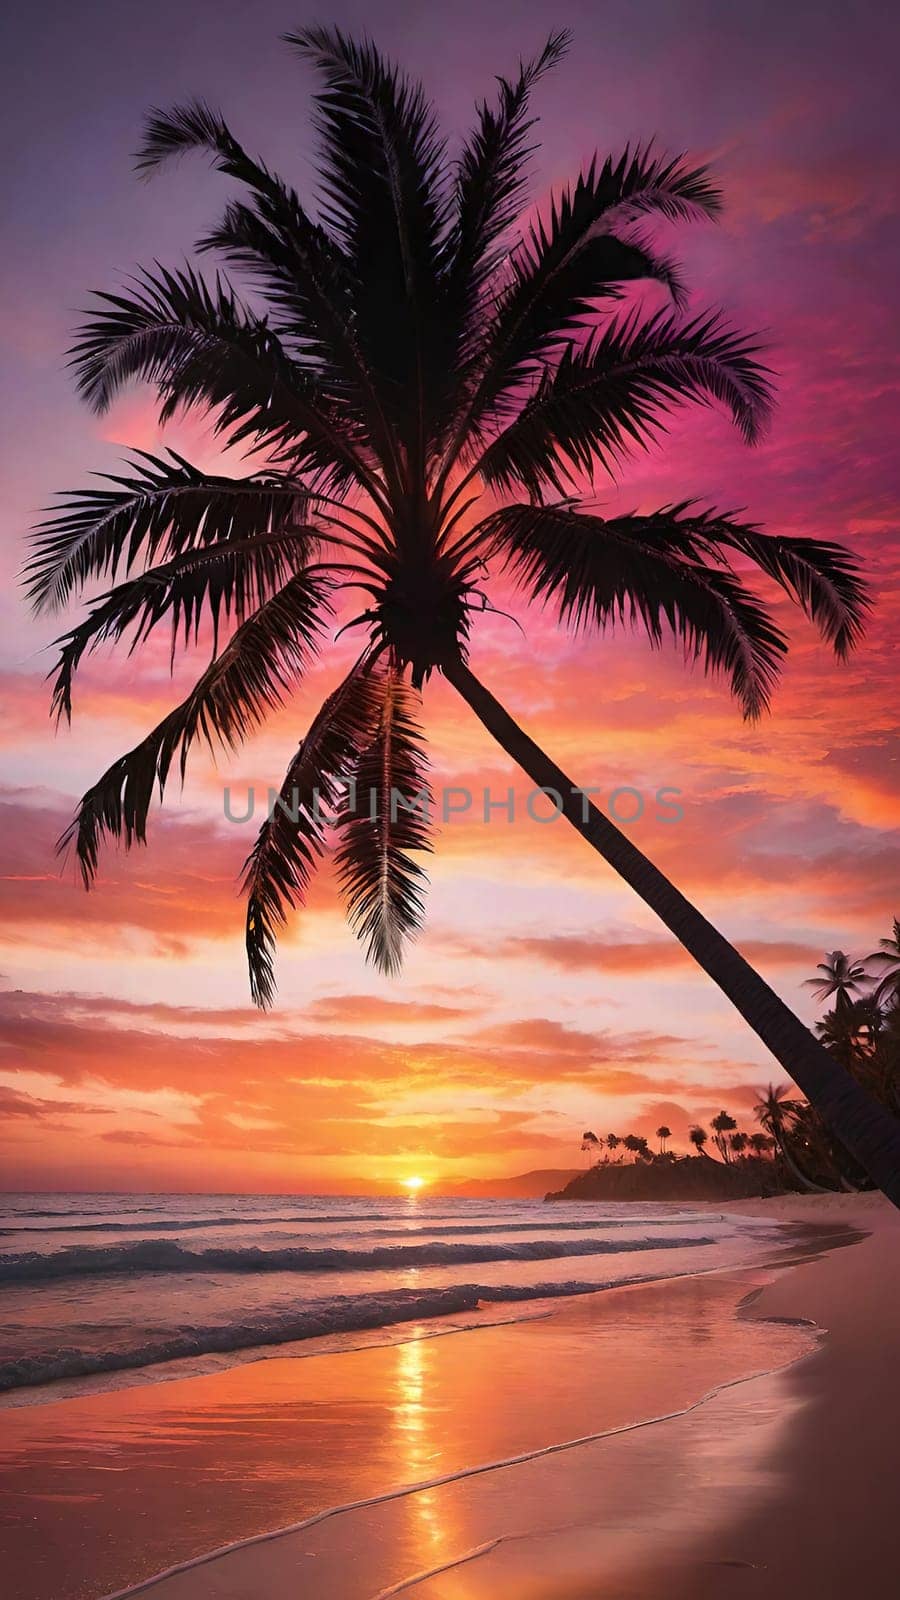 Silhouette of coconut palm tree on the beach at sunset.Palm trees on the beach at sunset. Beautiful tropical landscape.